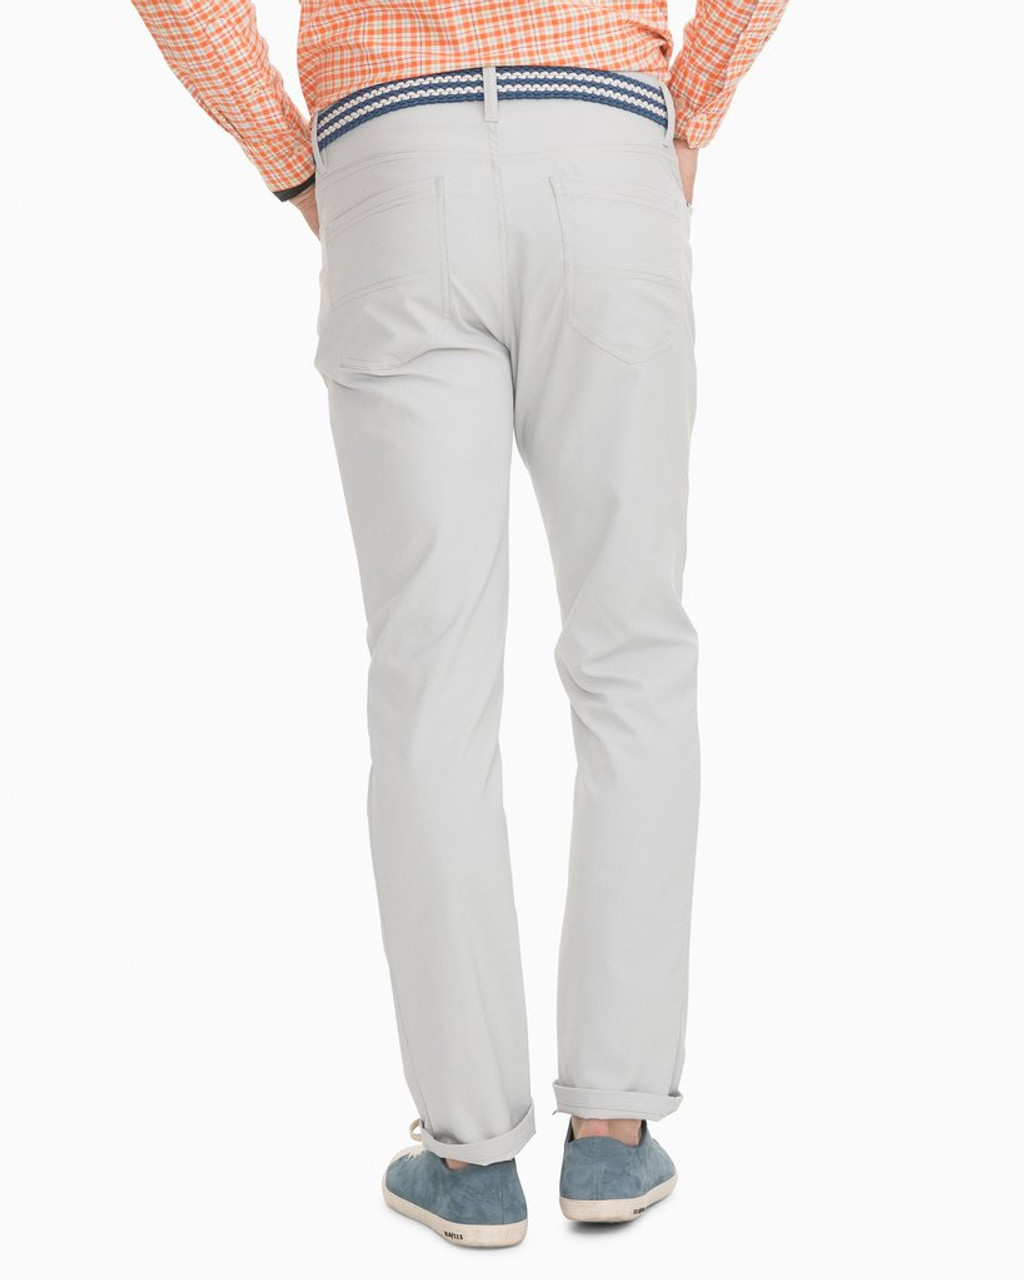 Cross Country Performance Pant